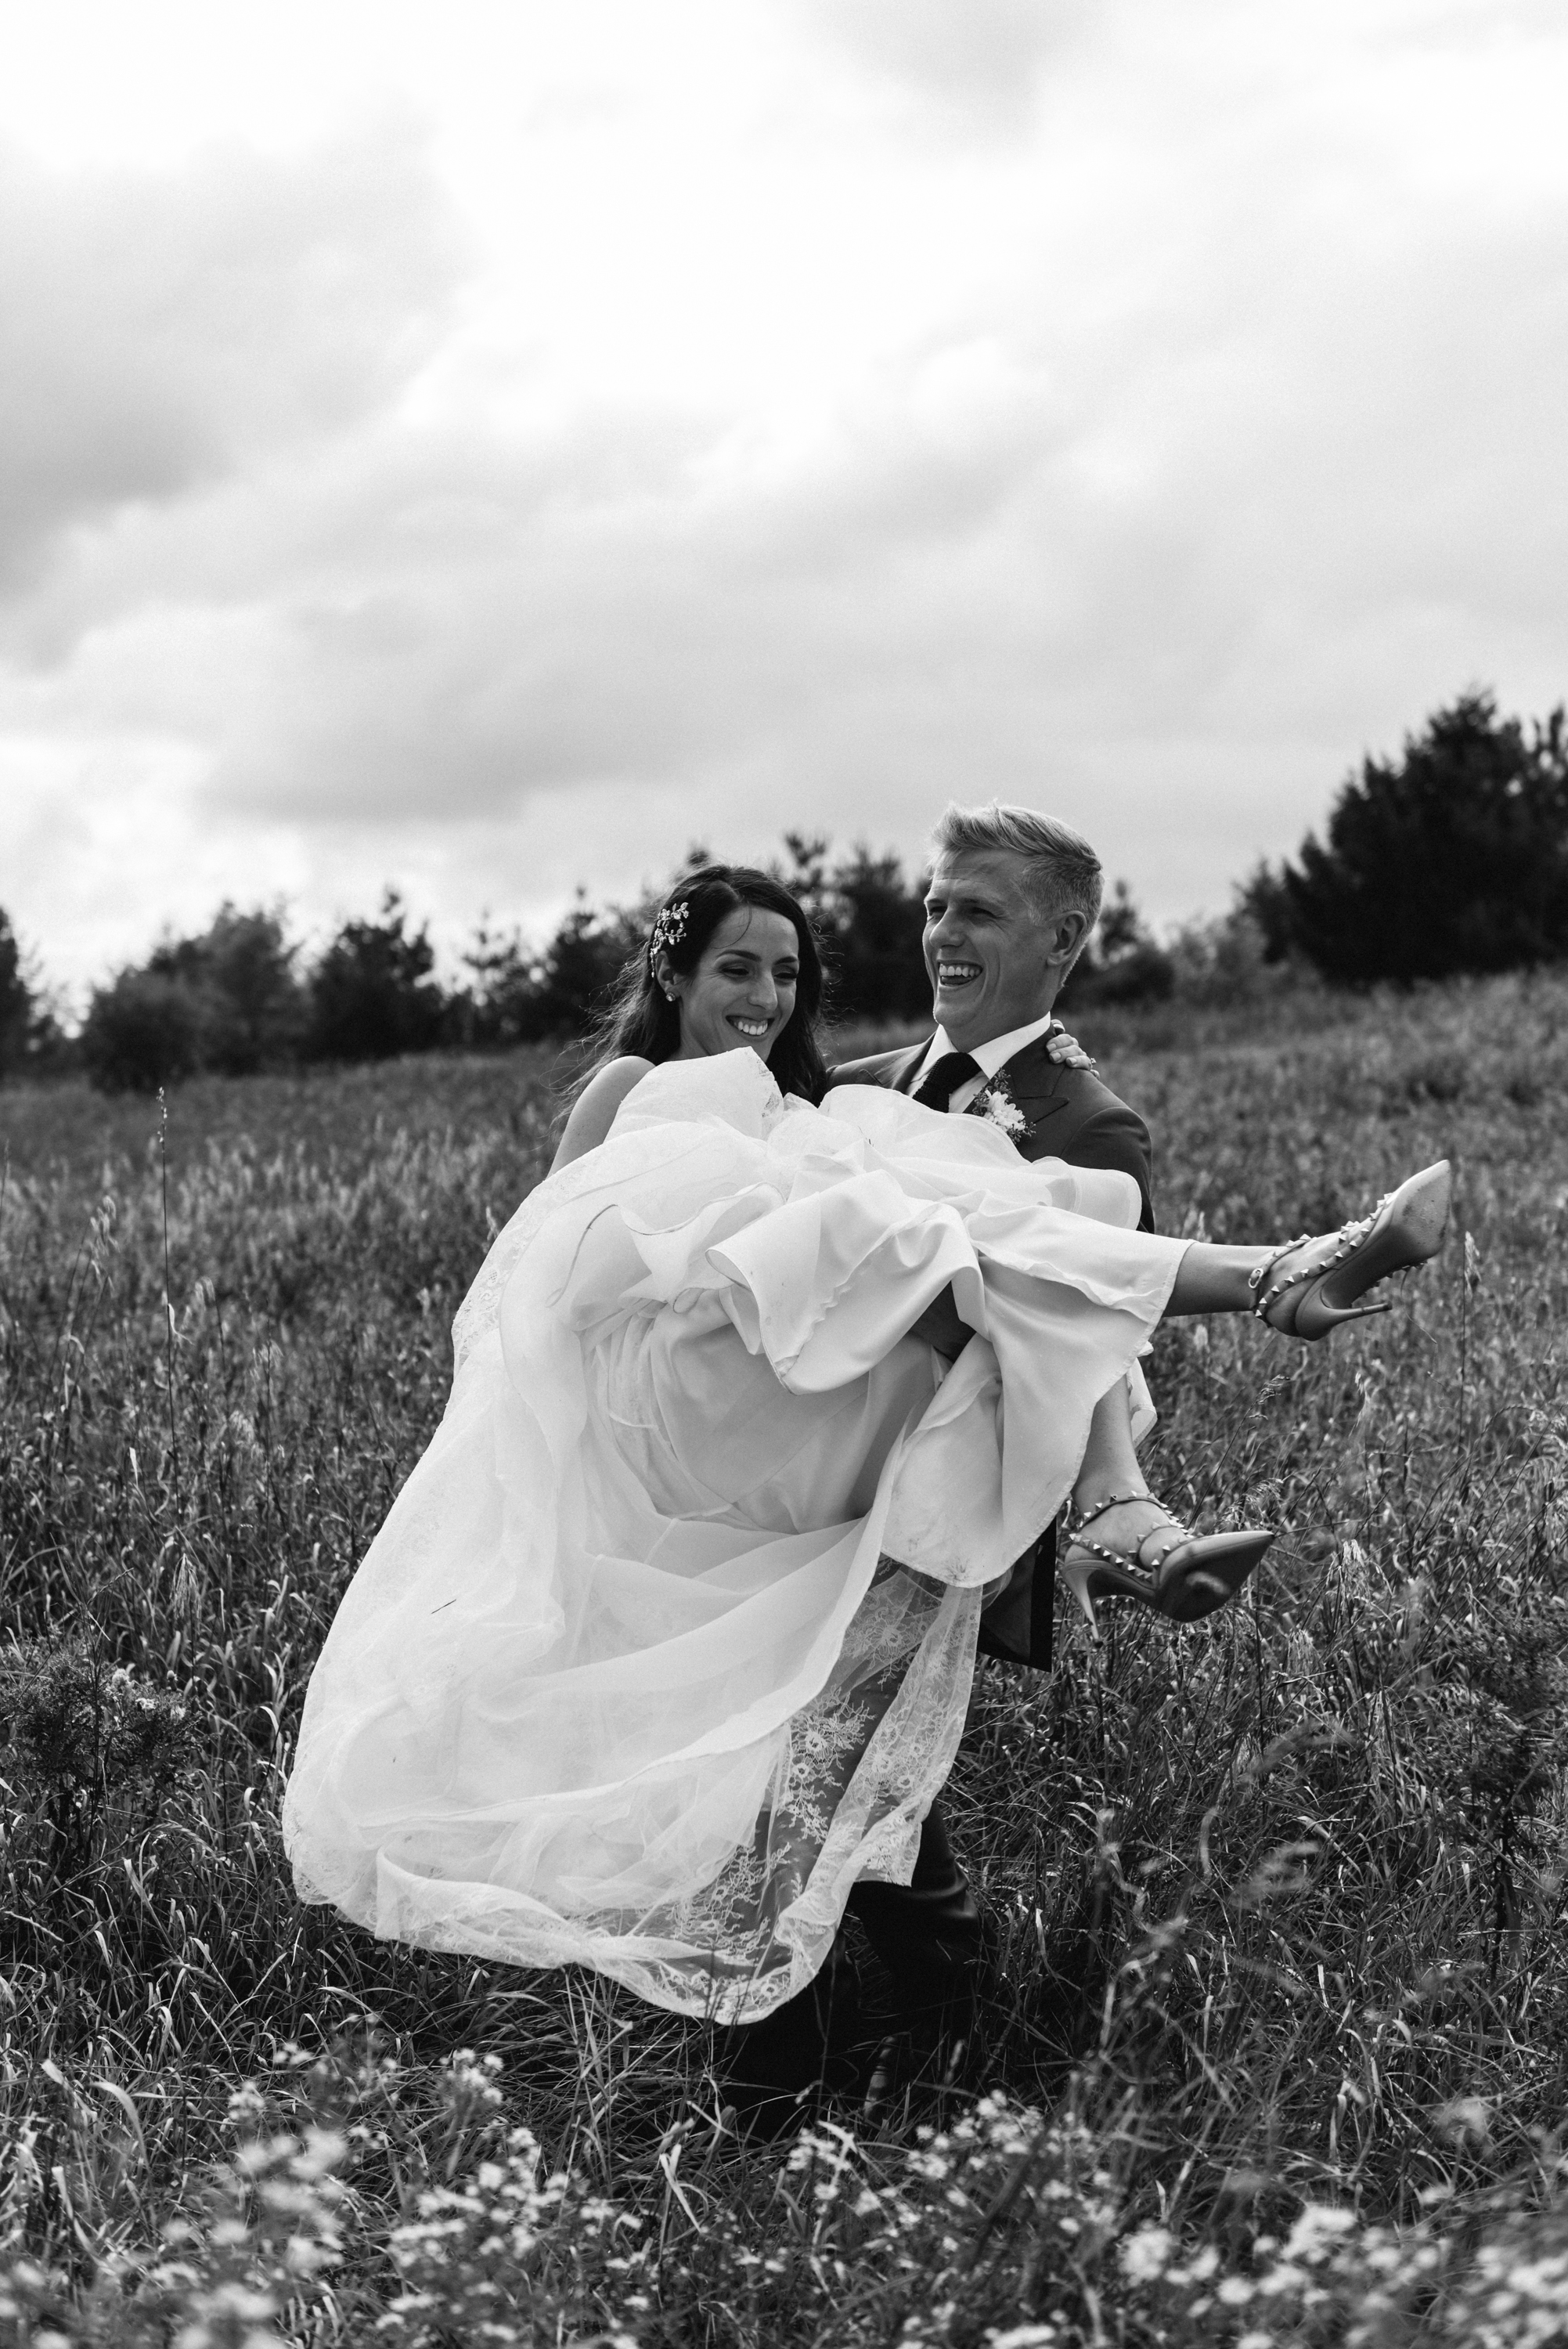 bride-groom-candid-black-white-photography